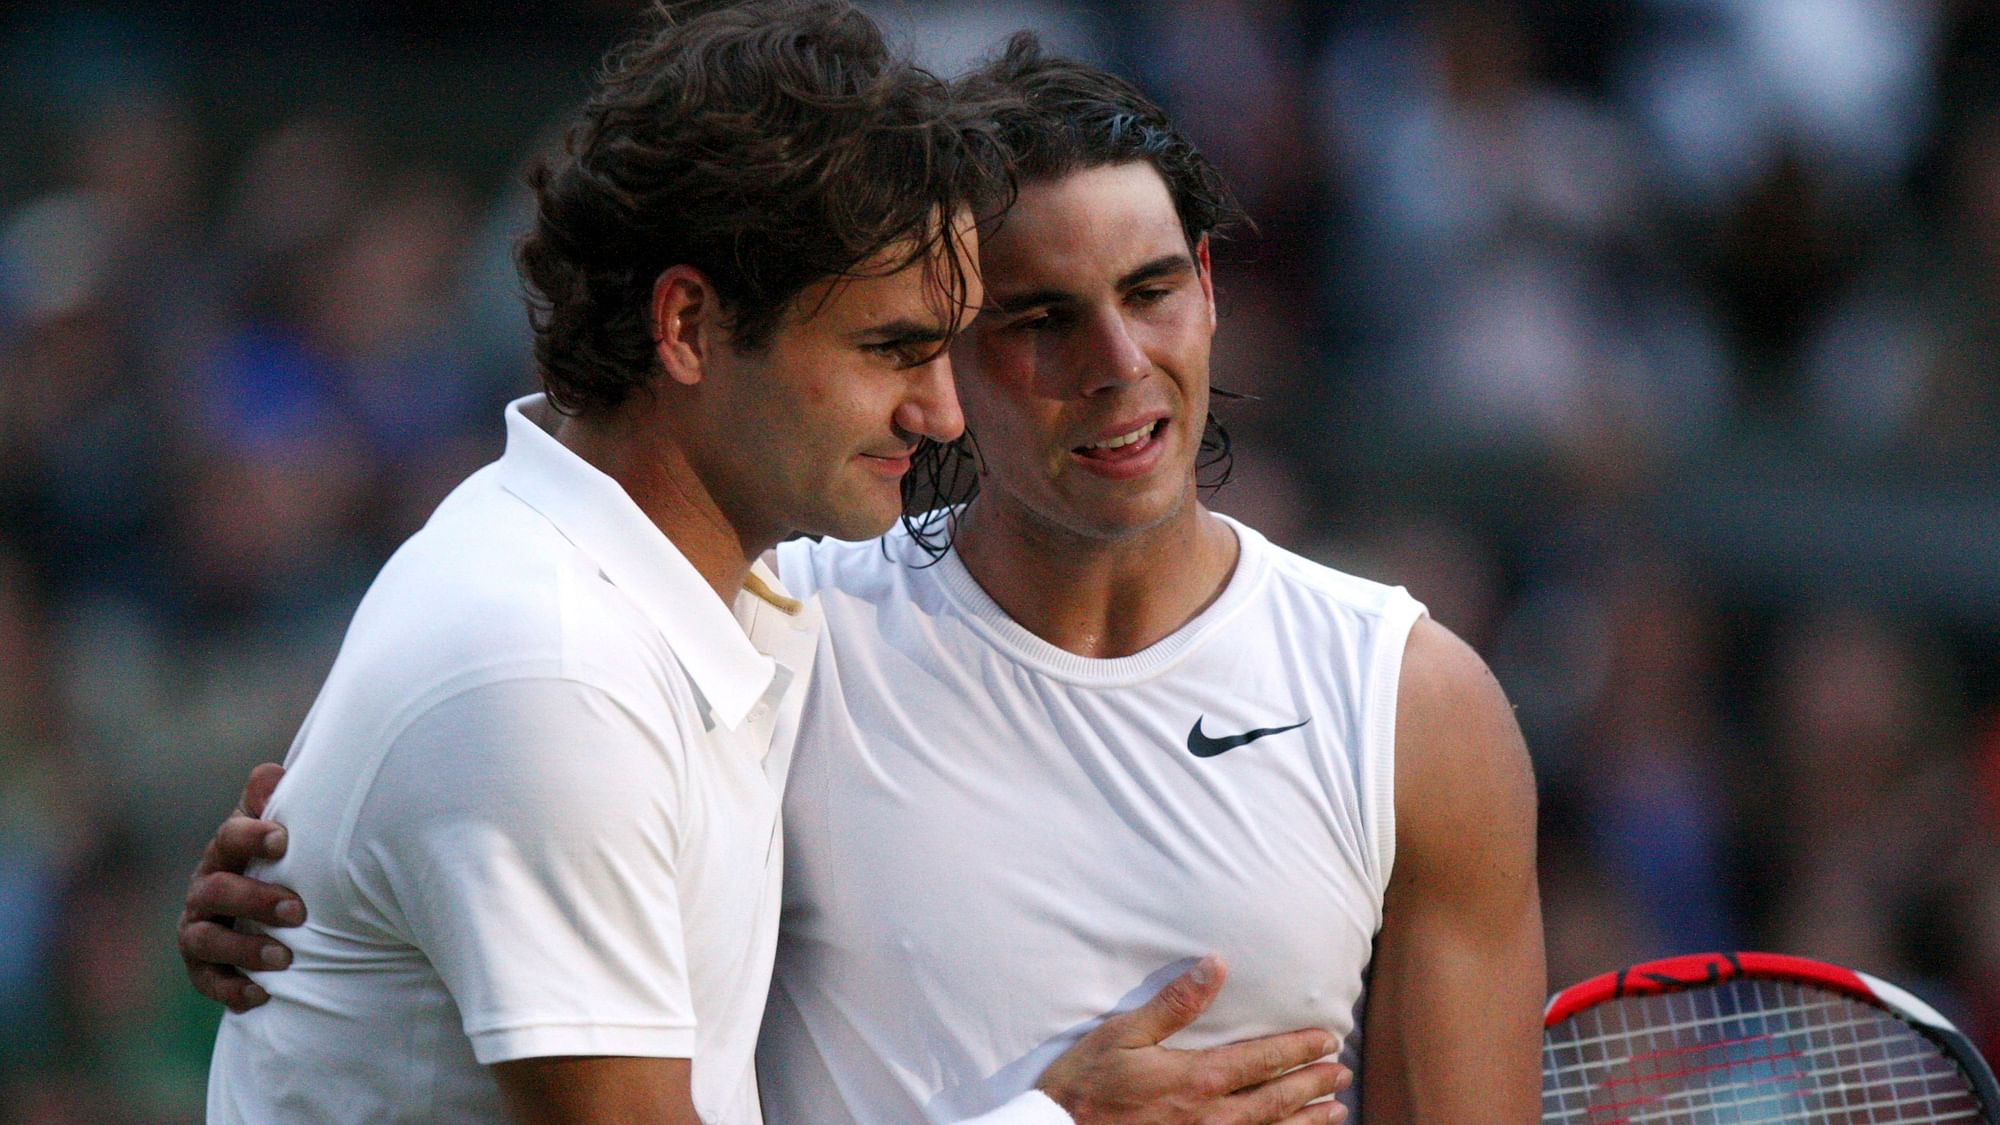 If both players have a successful campaign, Roger Federer is slated to play Rafael Nadal in the semi-finals of the 2019 Wimbledon.